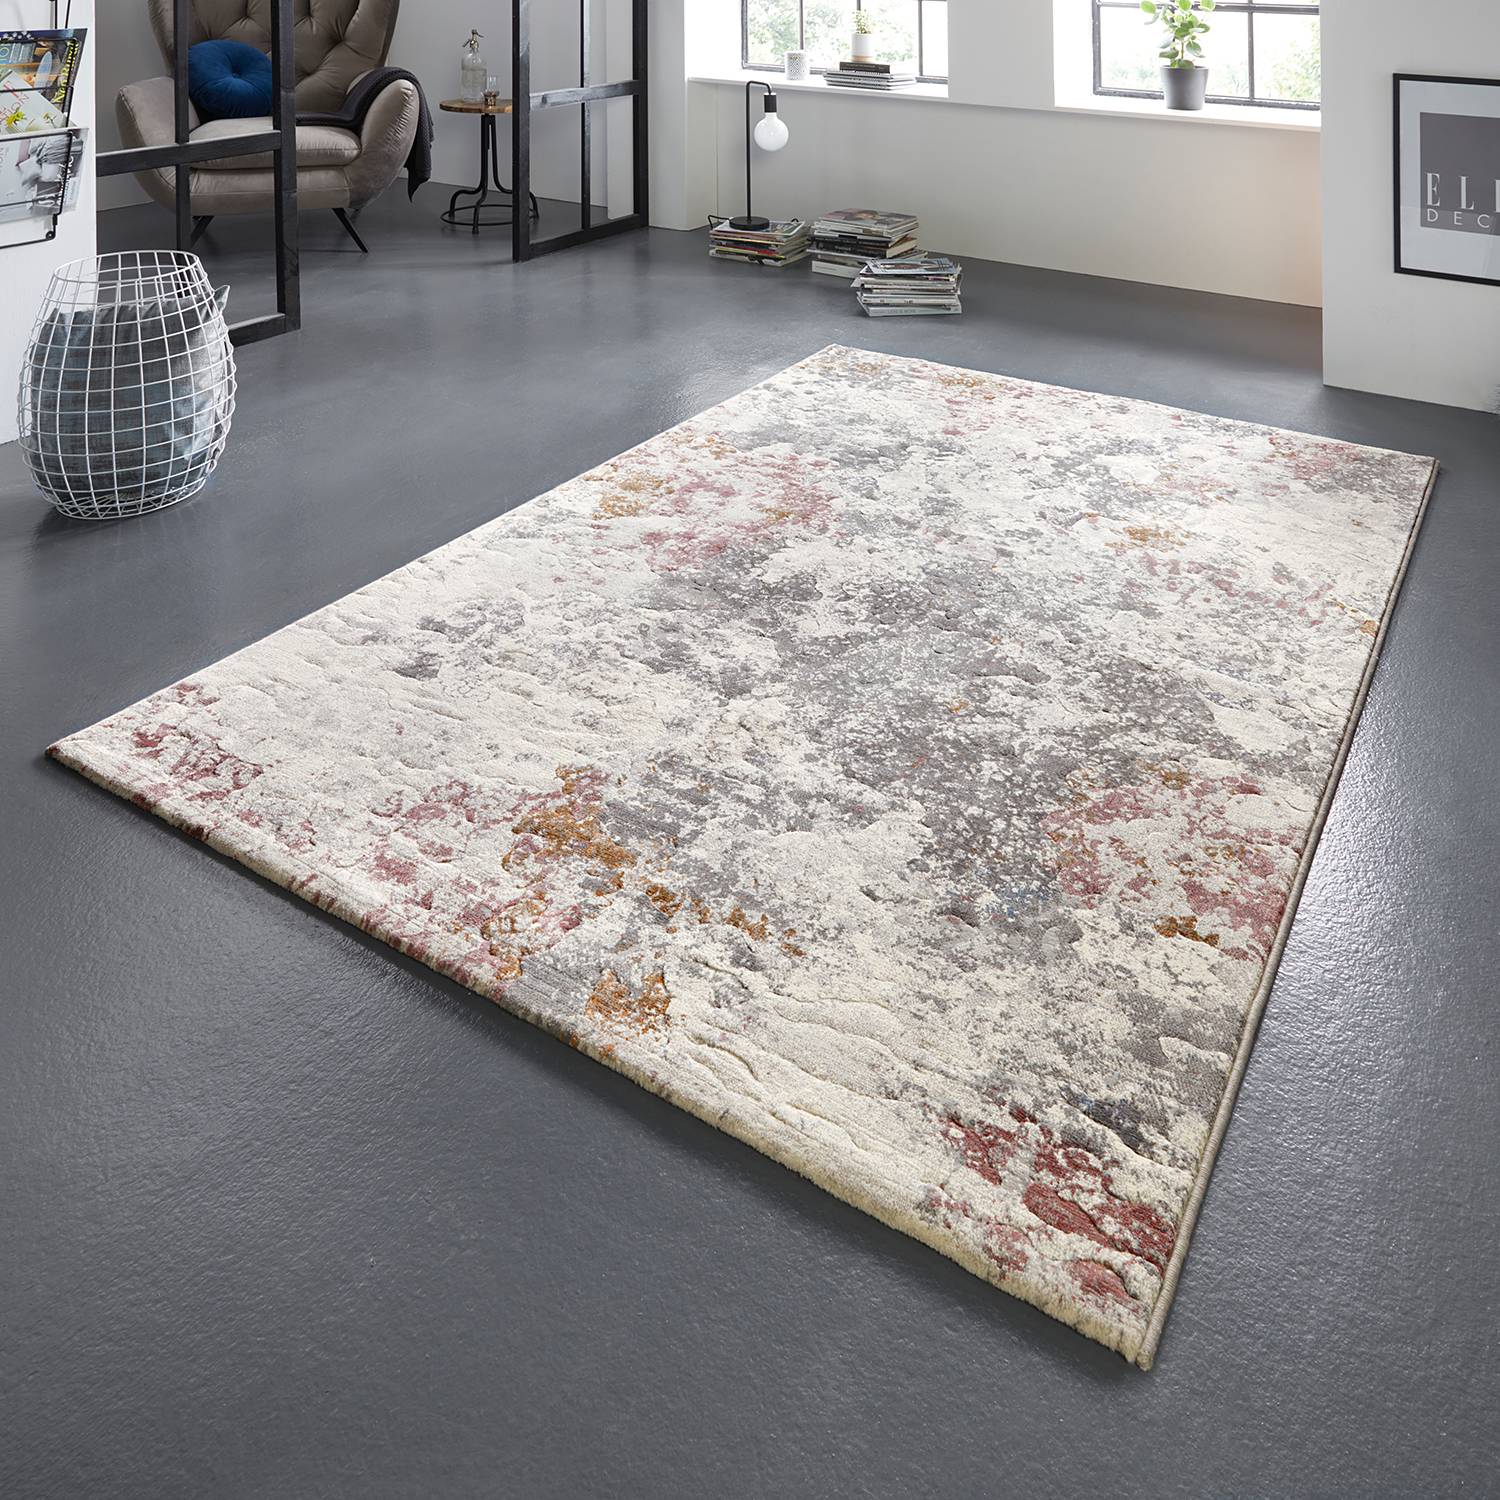 Image of Tapis Fontaine 000000001000168256